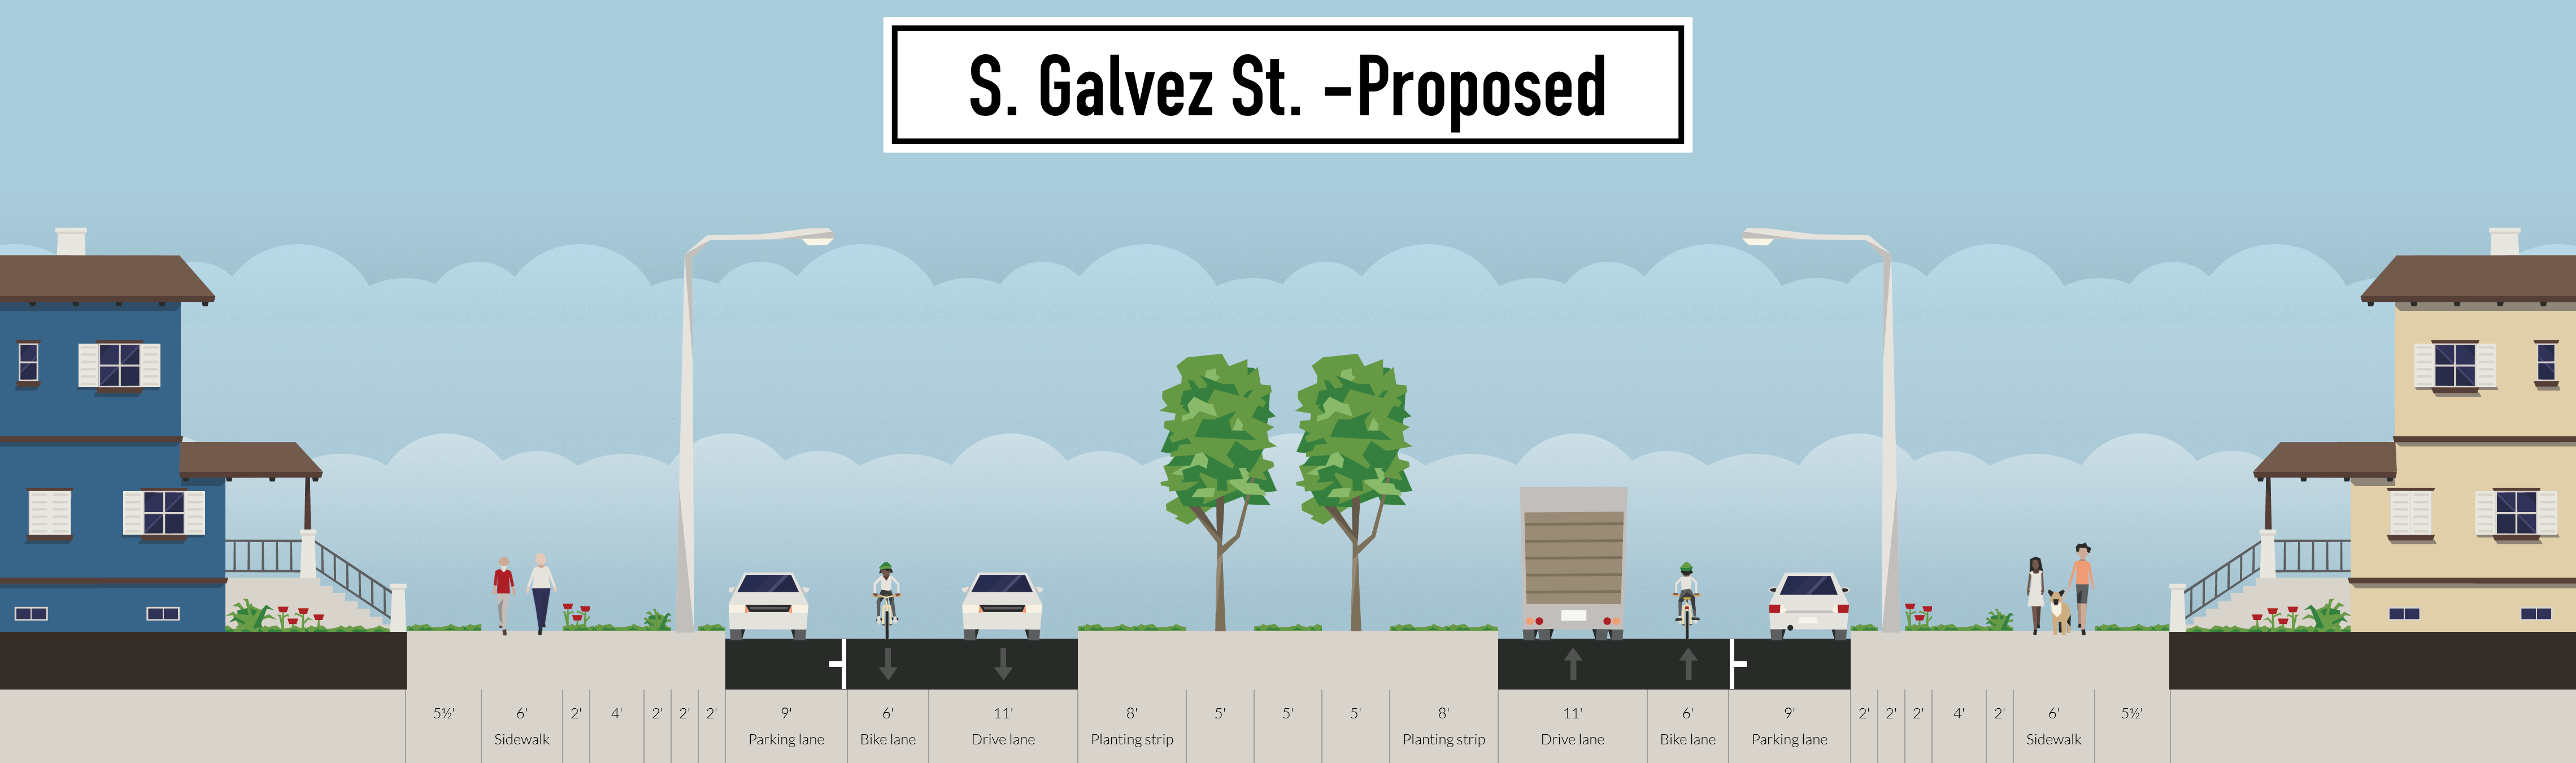 INCREASING DRAINAGE CAPACITY ON SOUTH GALVEZ STREET PROJECT